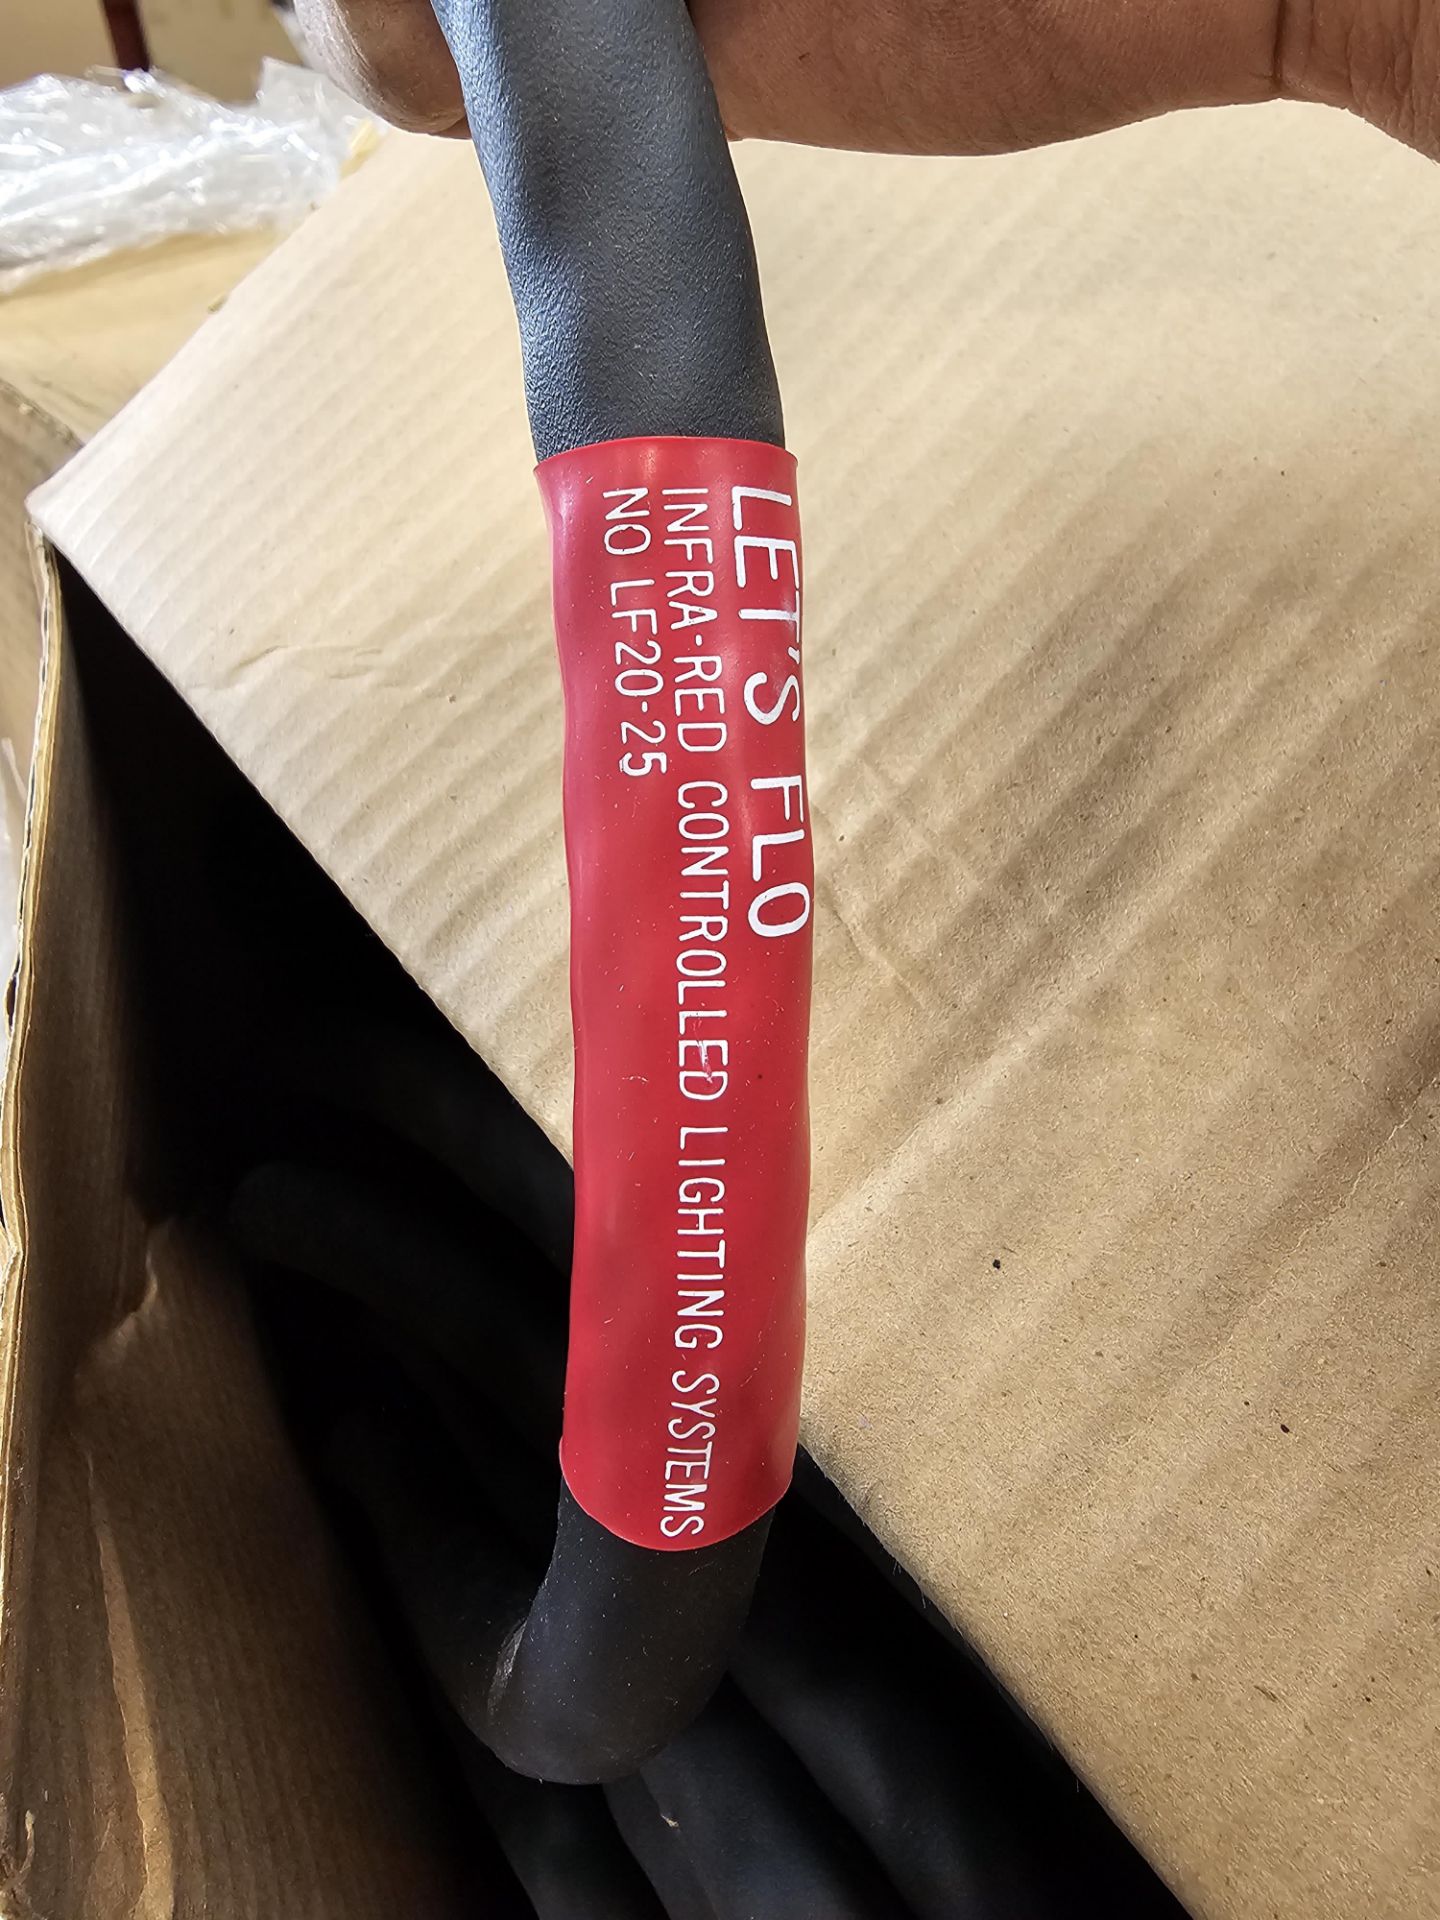 Pallet of Cable Infrared Contoled Lighting System Cable (SOLD AS-IS - NO WARRANTY) - Image 6 of 6